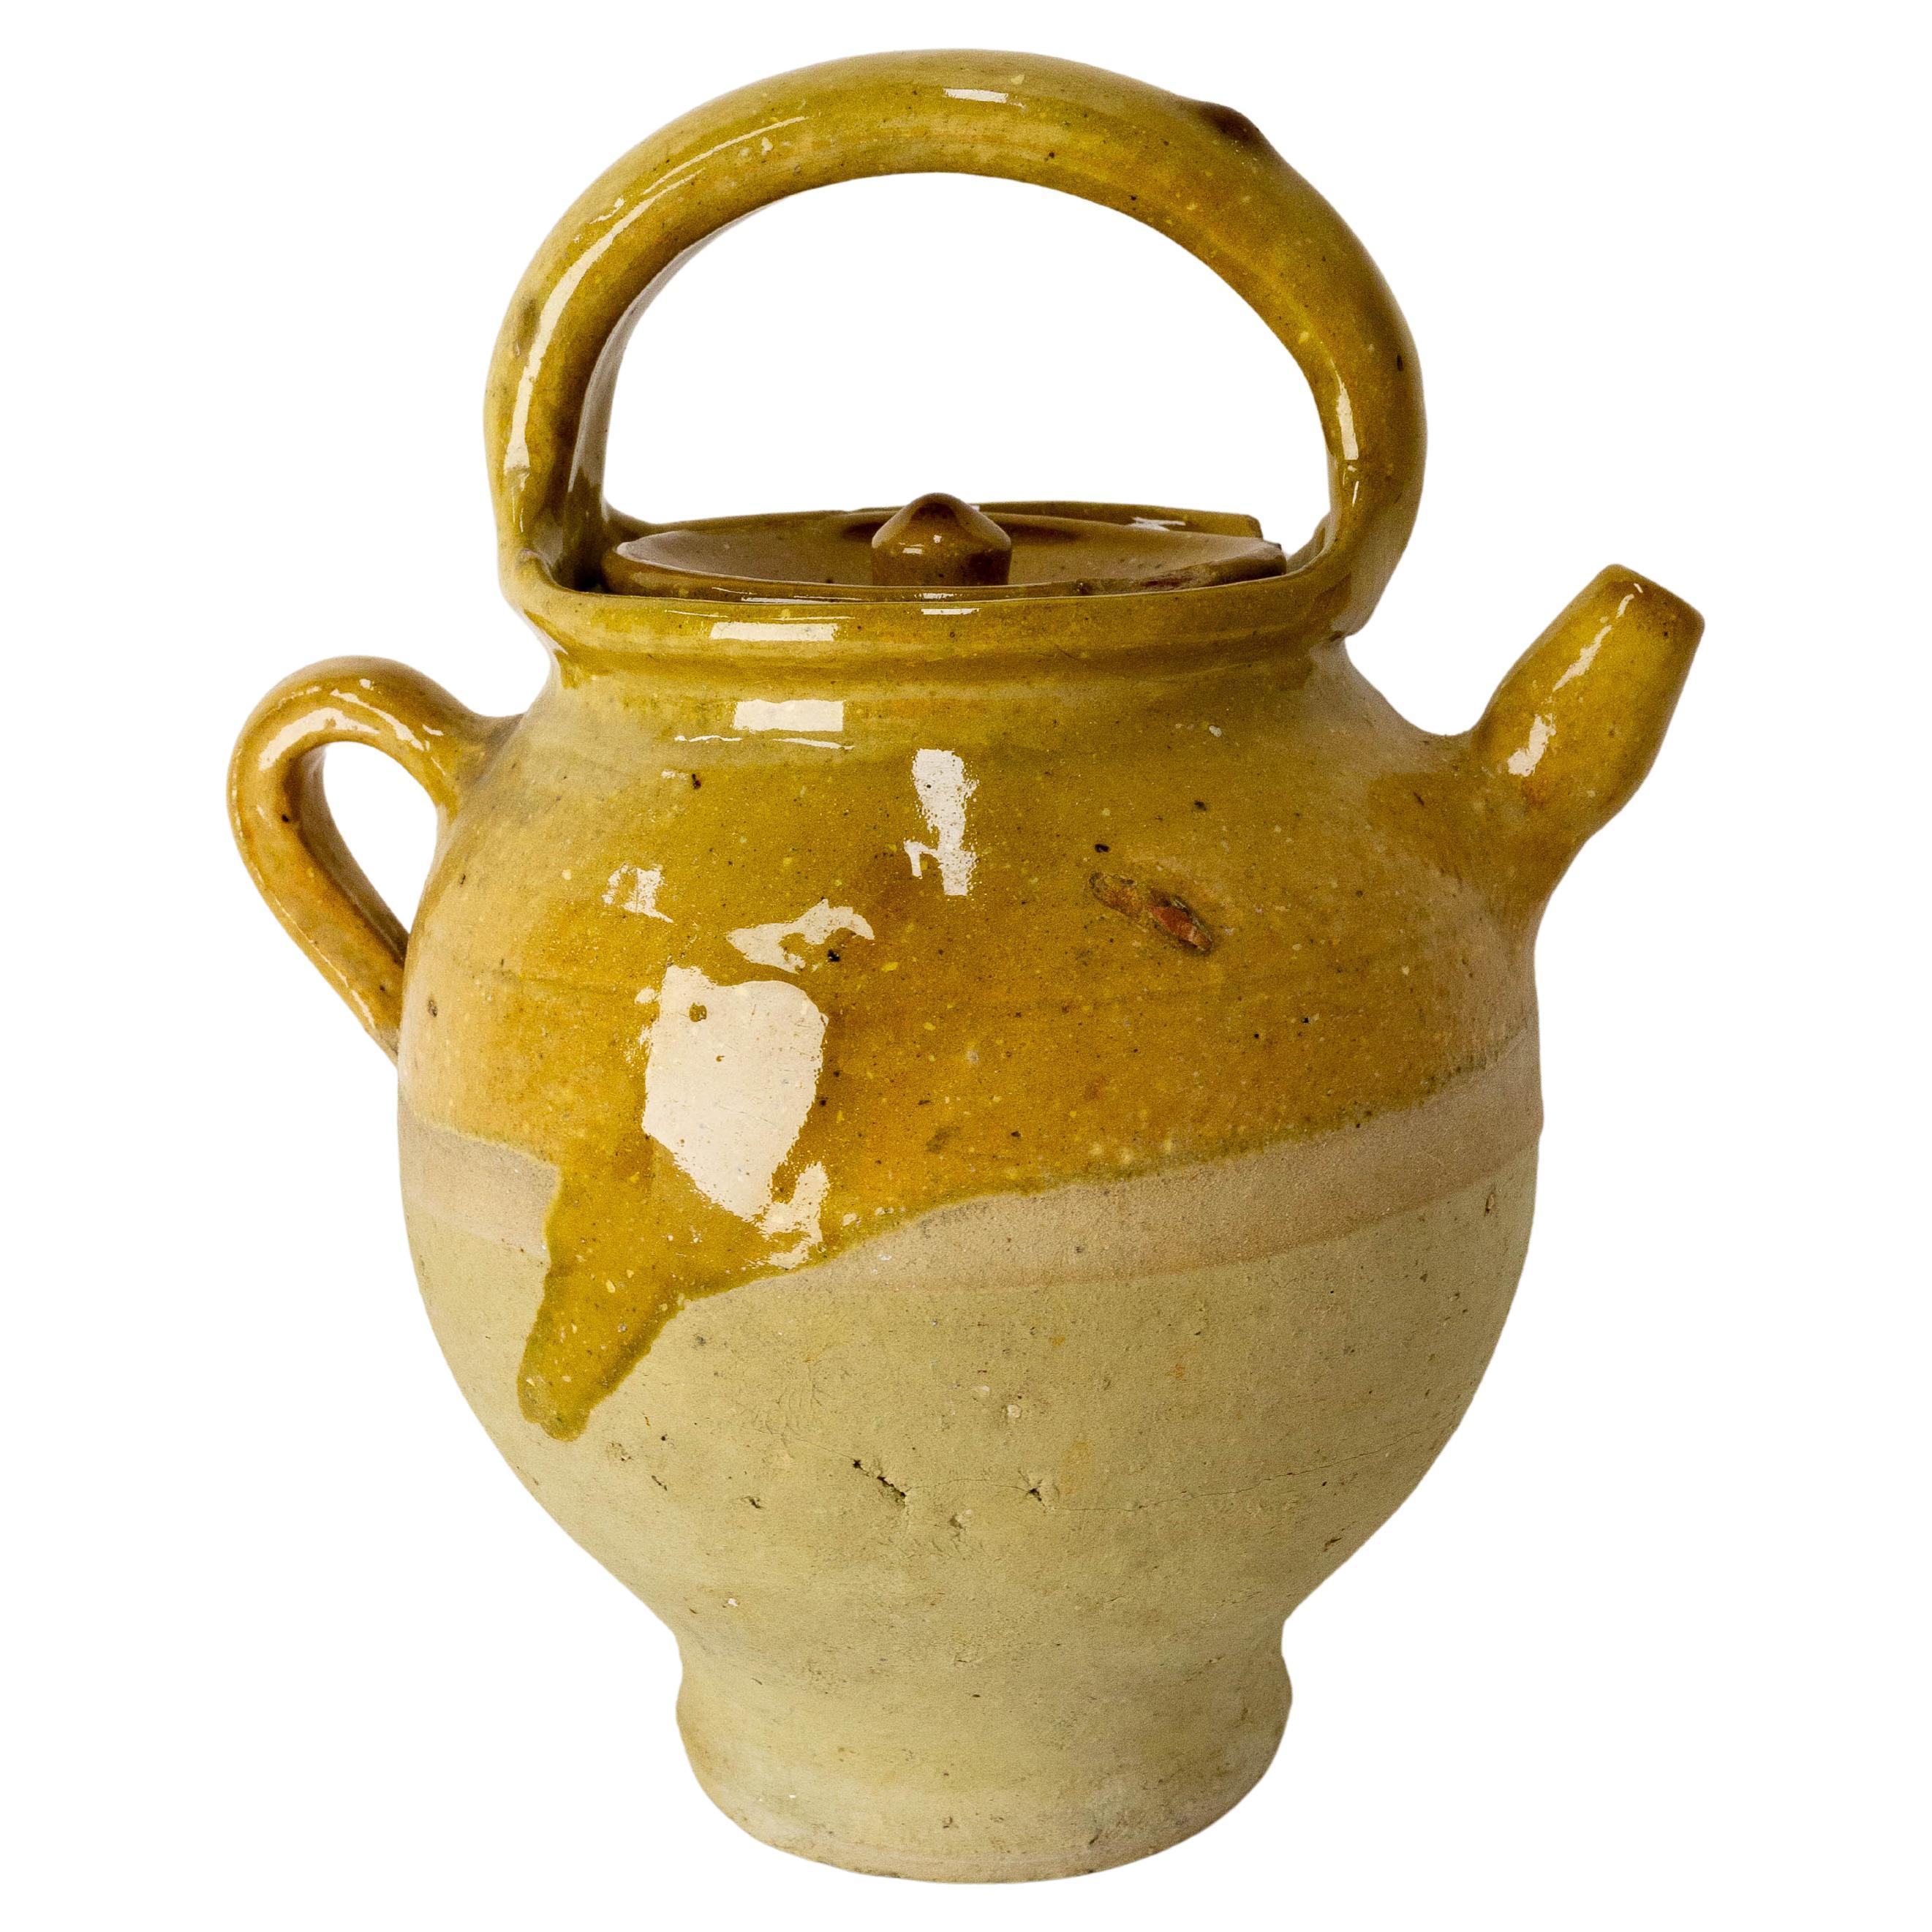 French Terracotta Little Jug or Pitcher, 19th Century